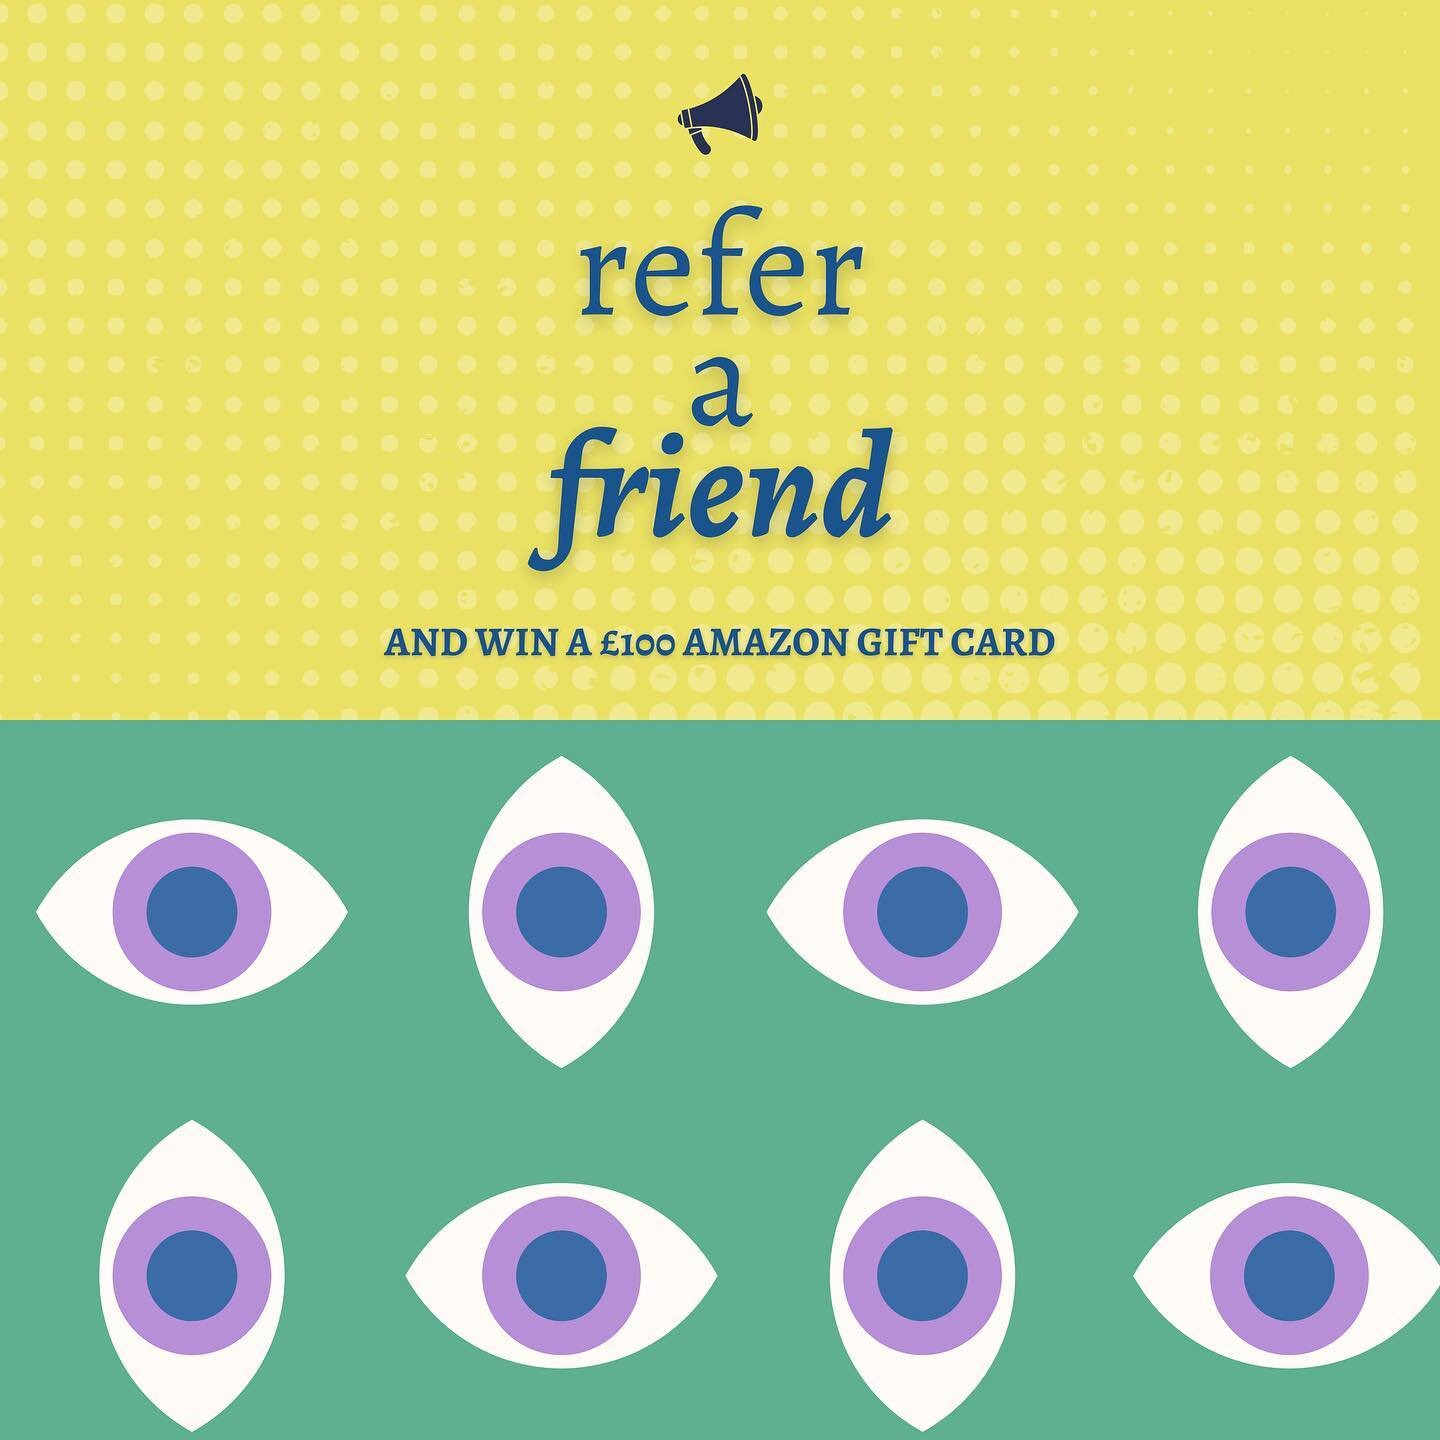 Send your loved ones to us and they'll have hassle free sight.

Then, you can buy them something nice with the &pound;100 Amazon gift card you win in the process! 

#eye #eyes #eyehealth #eyesurgeon #eyesurgery #eyedoctor #lasik #lasiksurgery #lasers